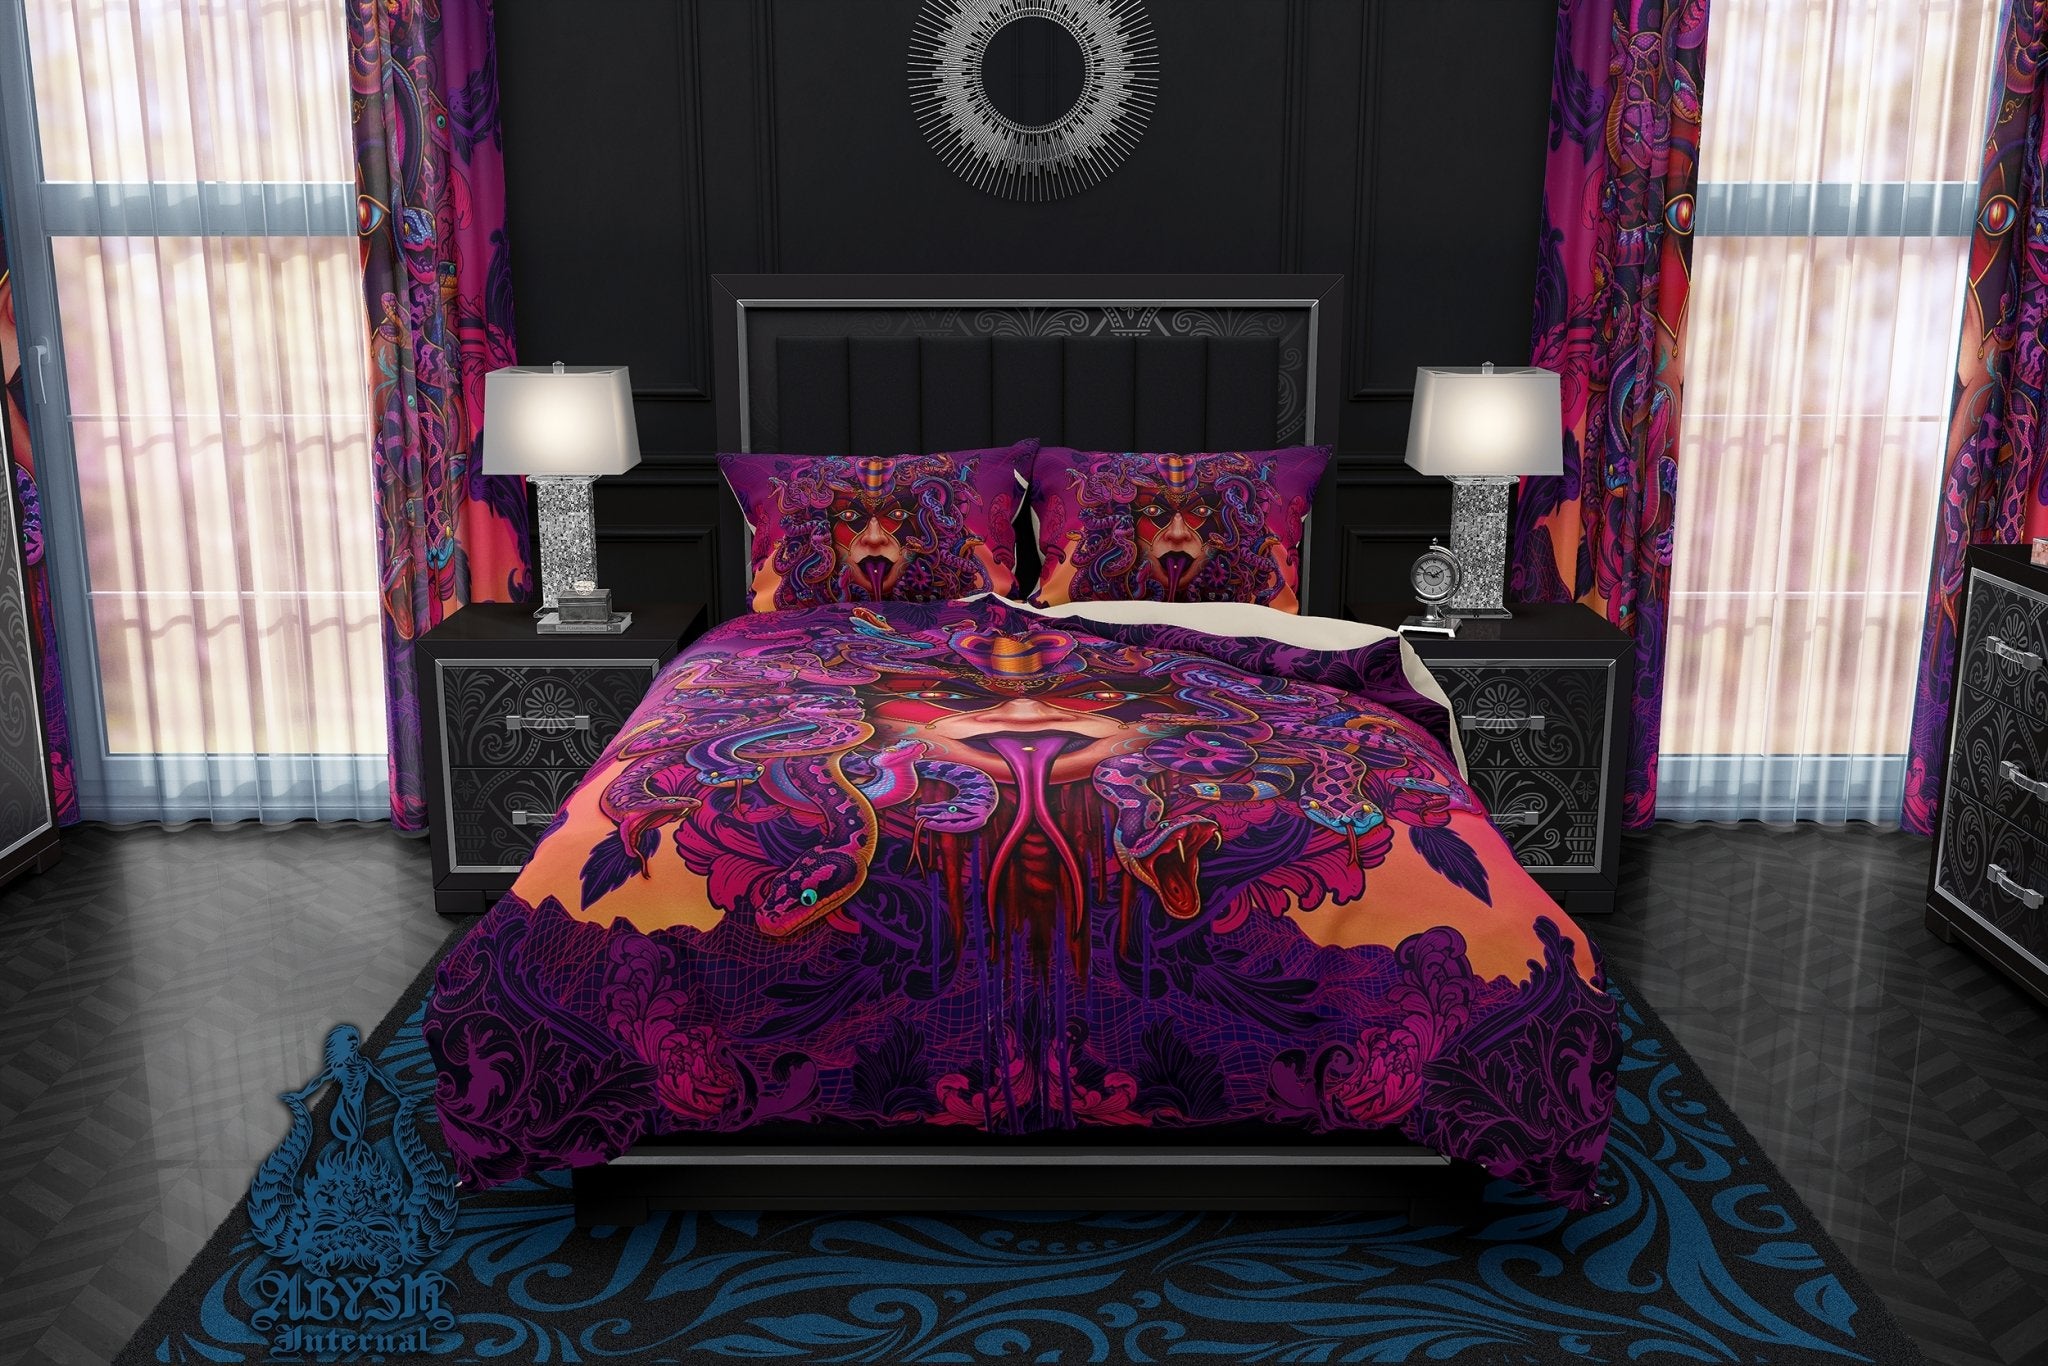 Psychedelic Bedding Set, Comforter and Duvet, Vaporwave Bed Cover and Retrowave Bedroom Decor, King, Queen and Twin Size, Synthwave and Fantasy Gamer 80s Room - Medusa Mock - Abysm Internal